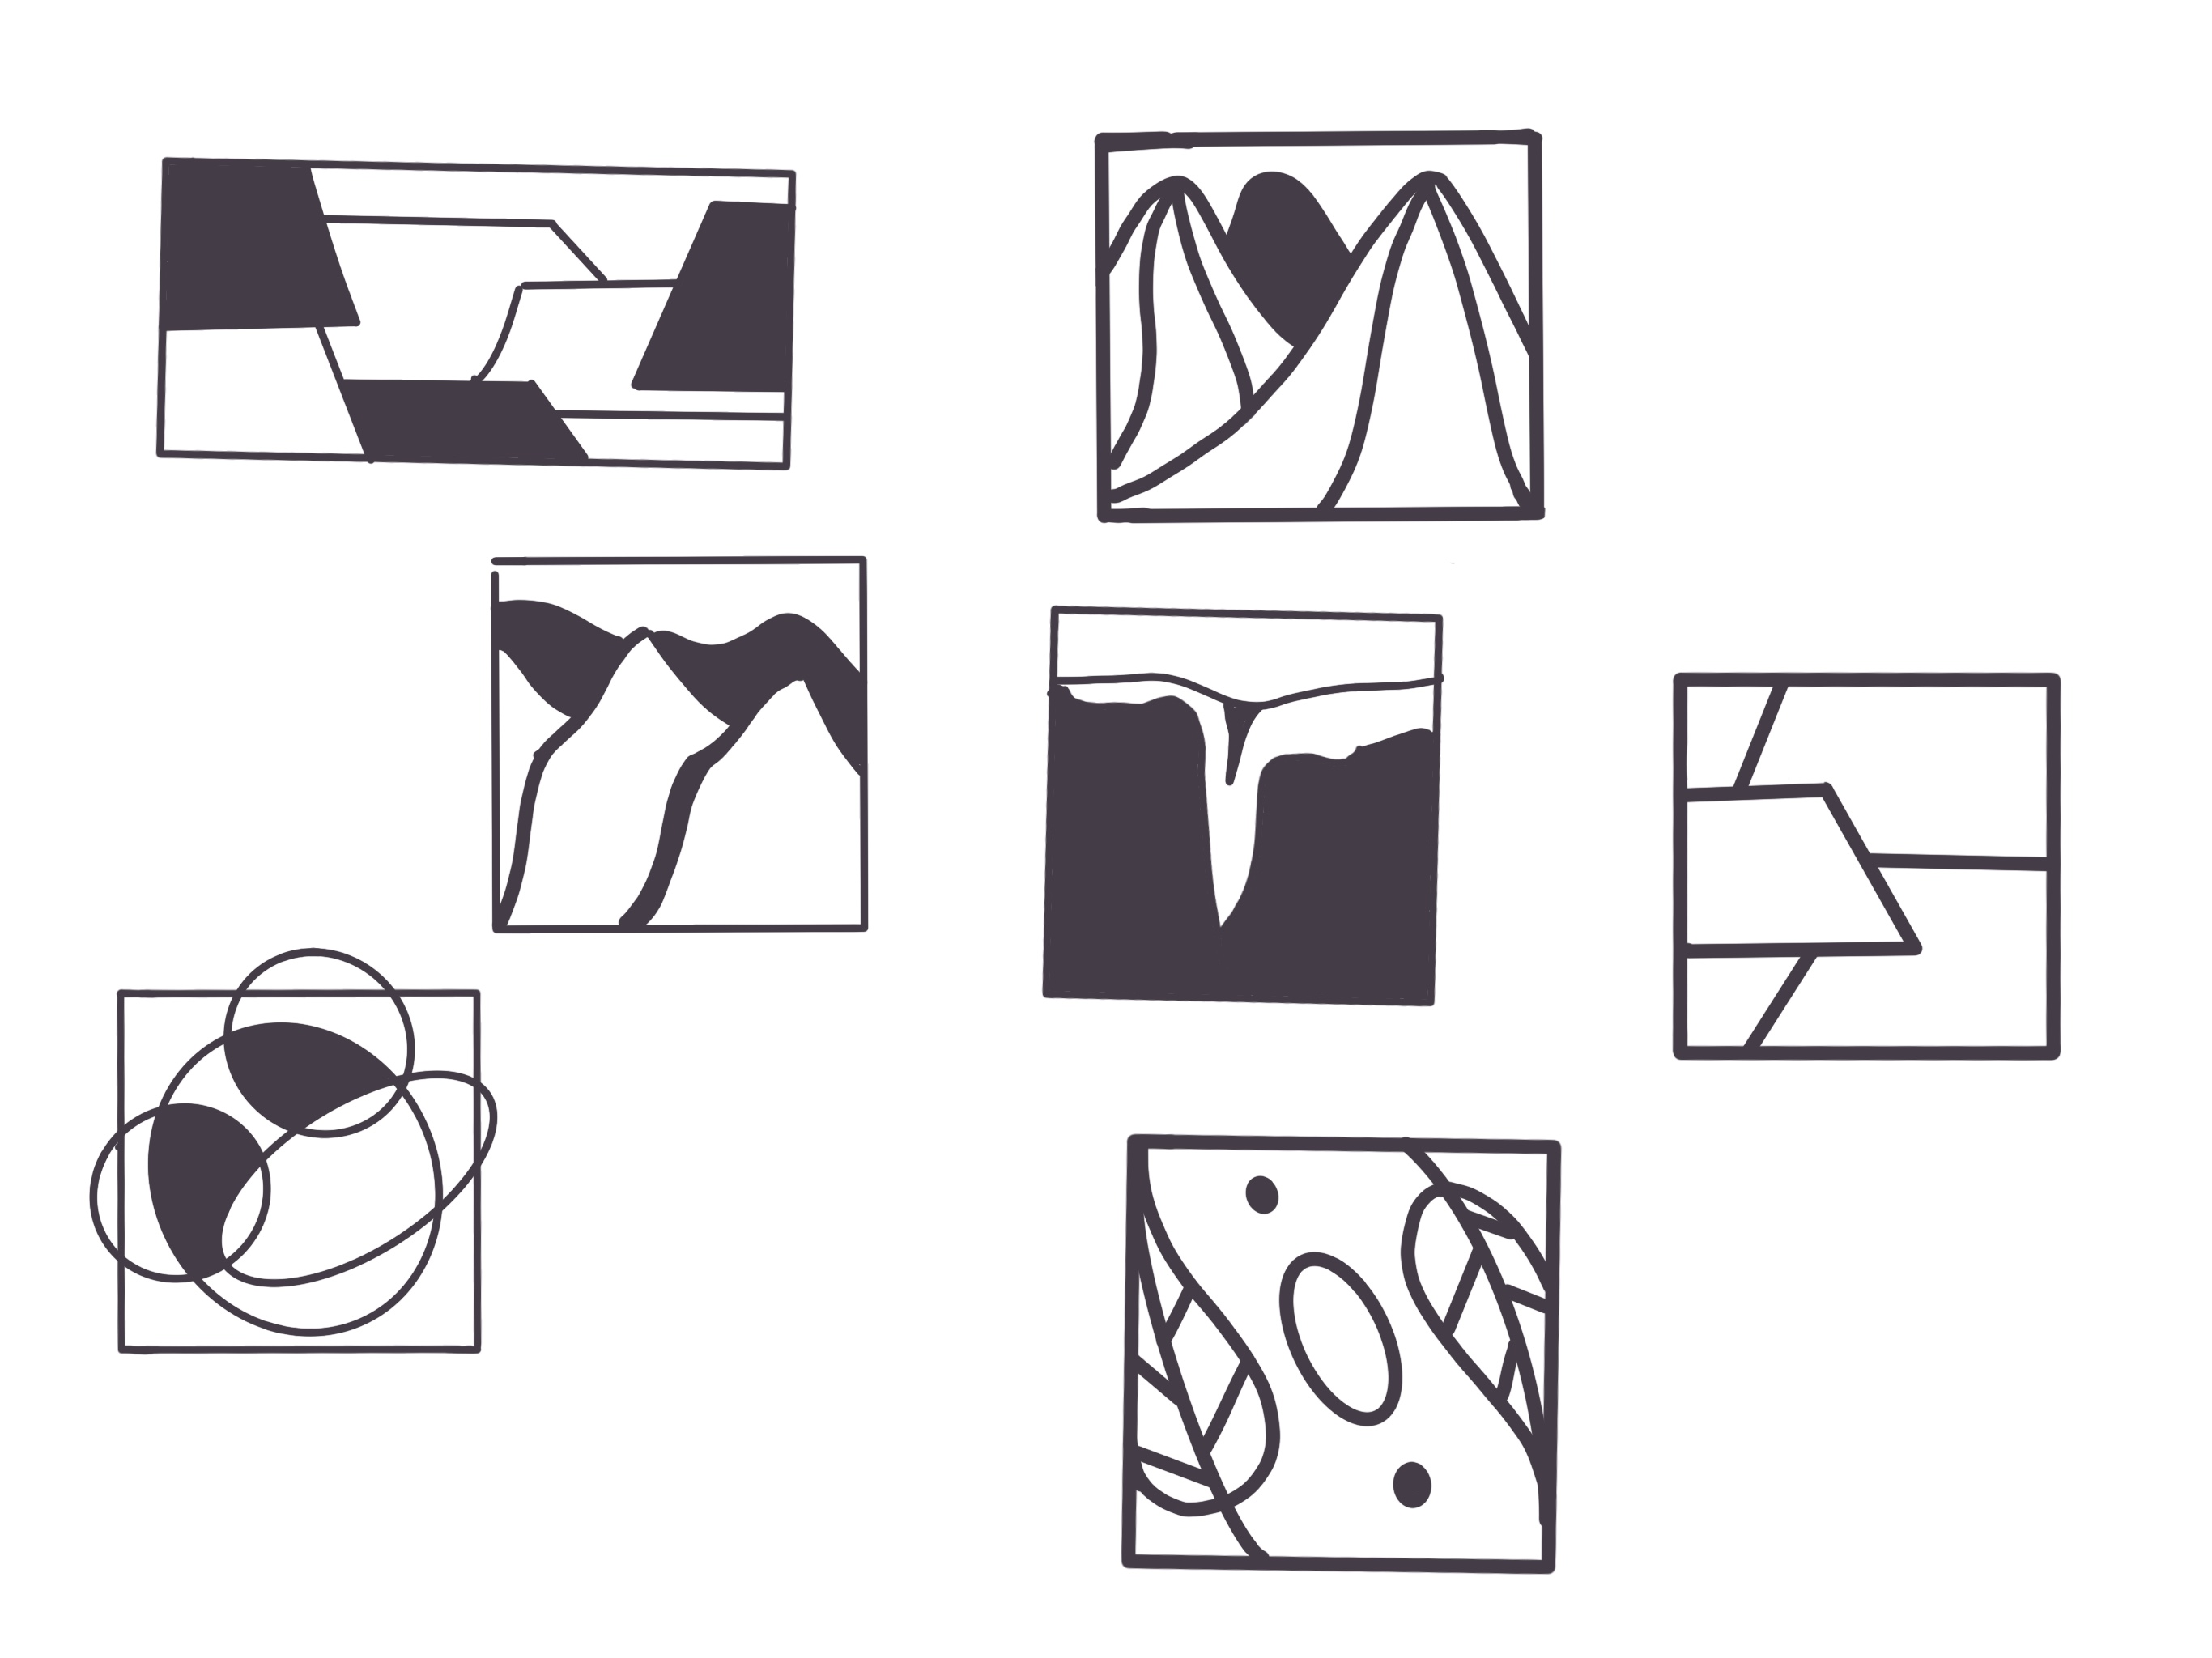 Harbour Roughs, early iterations in black and white. The logo sketches are contained within shapes, either squares or rectangles. These versions are extremely abstract, playing with contrast and negative/positive space.